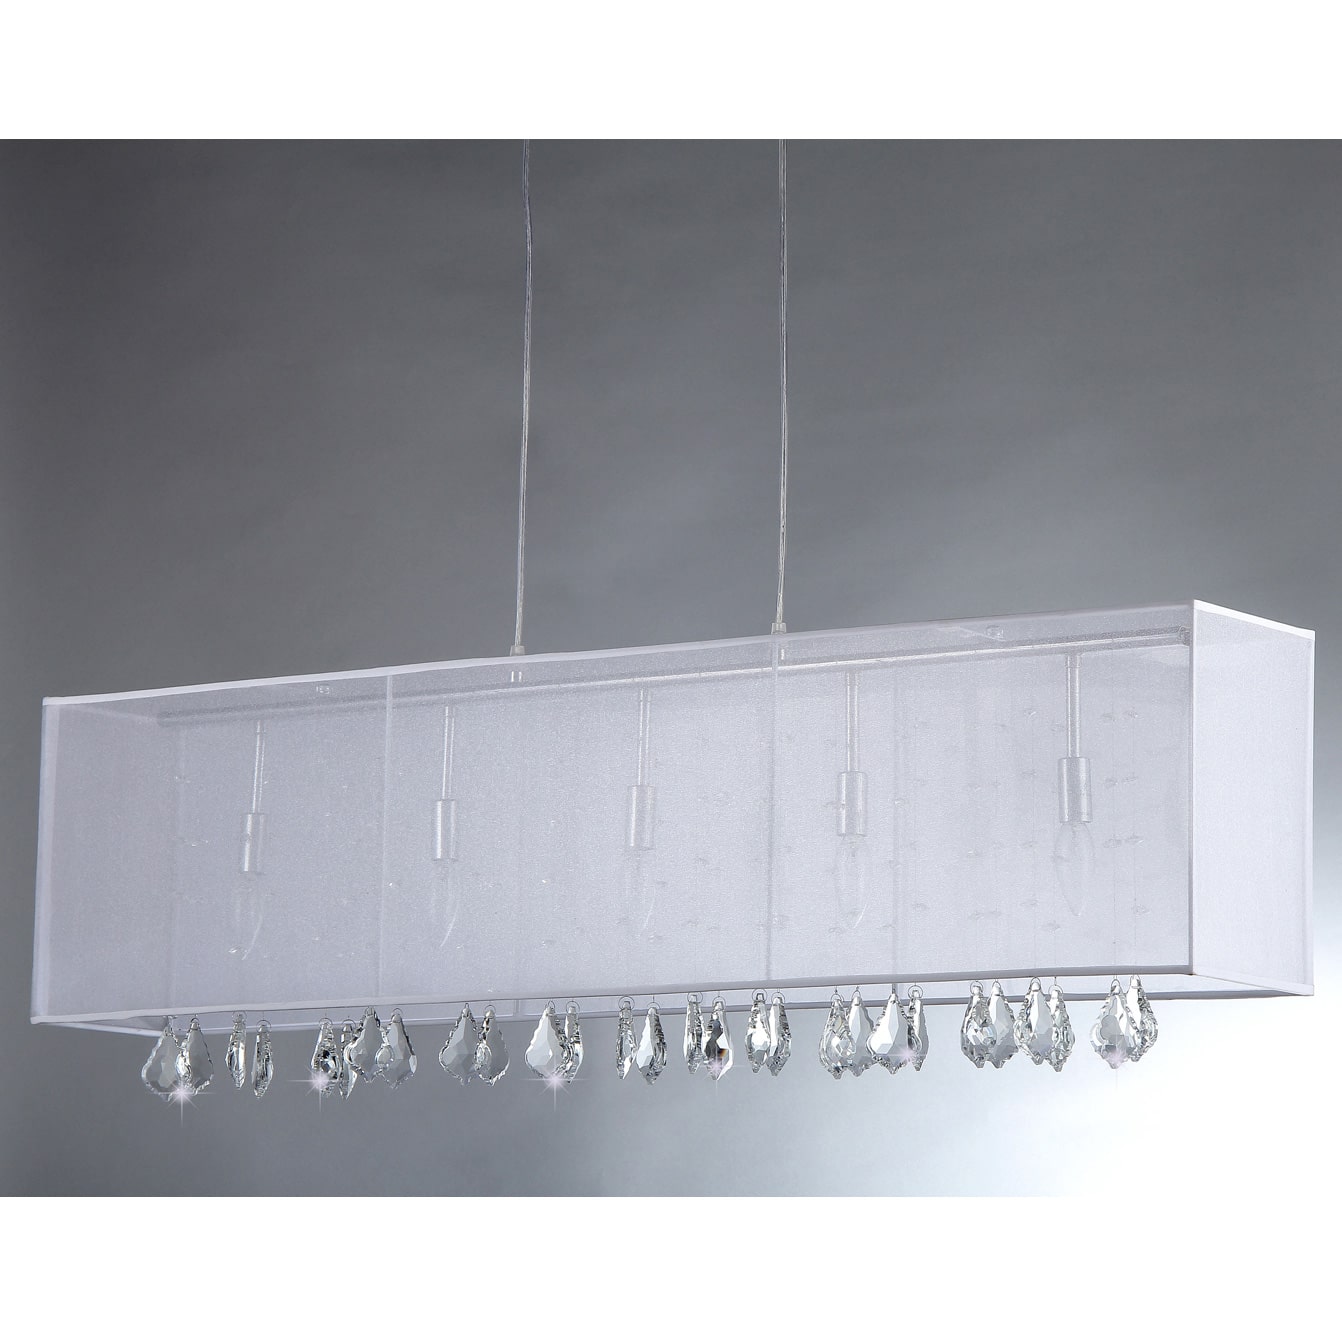 'Jess' Crystal and Mesh Bar Chandelier